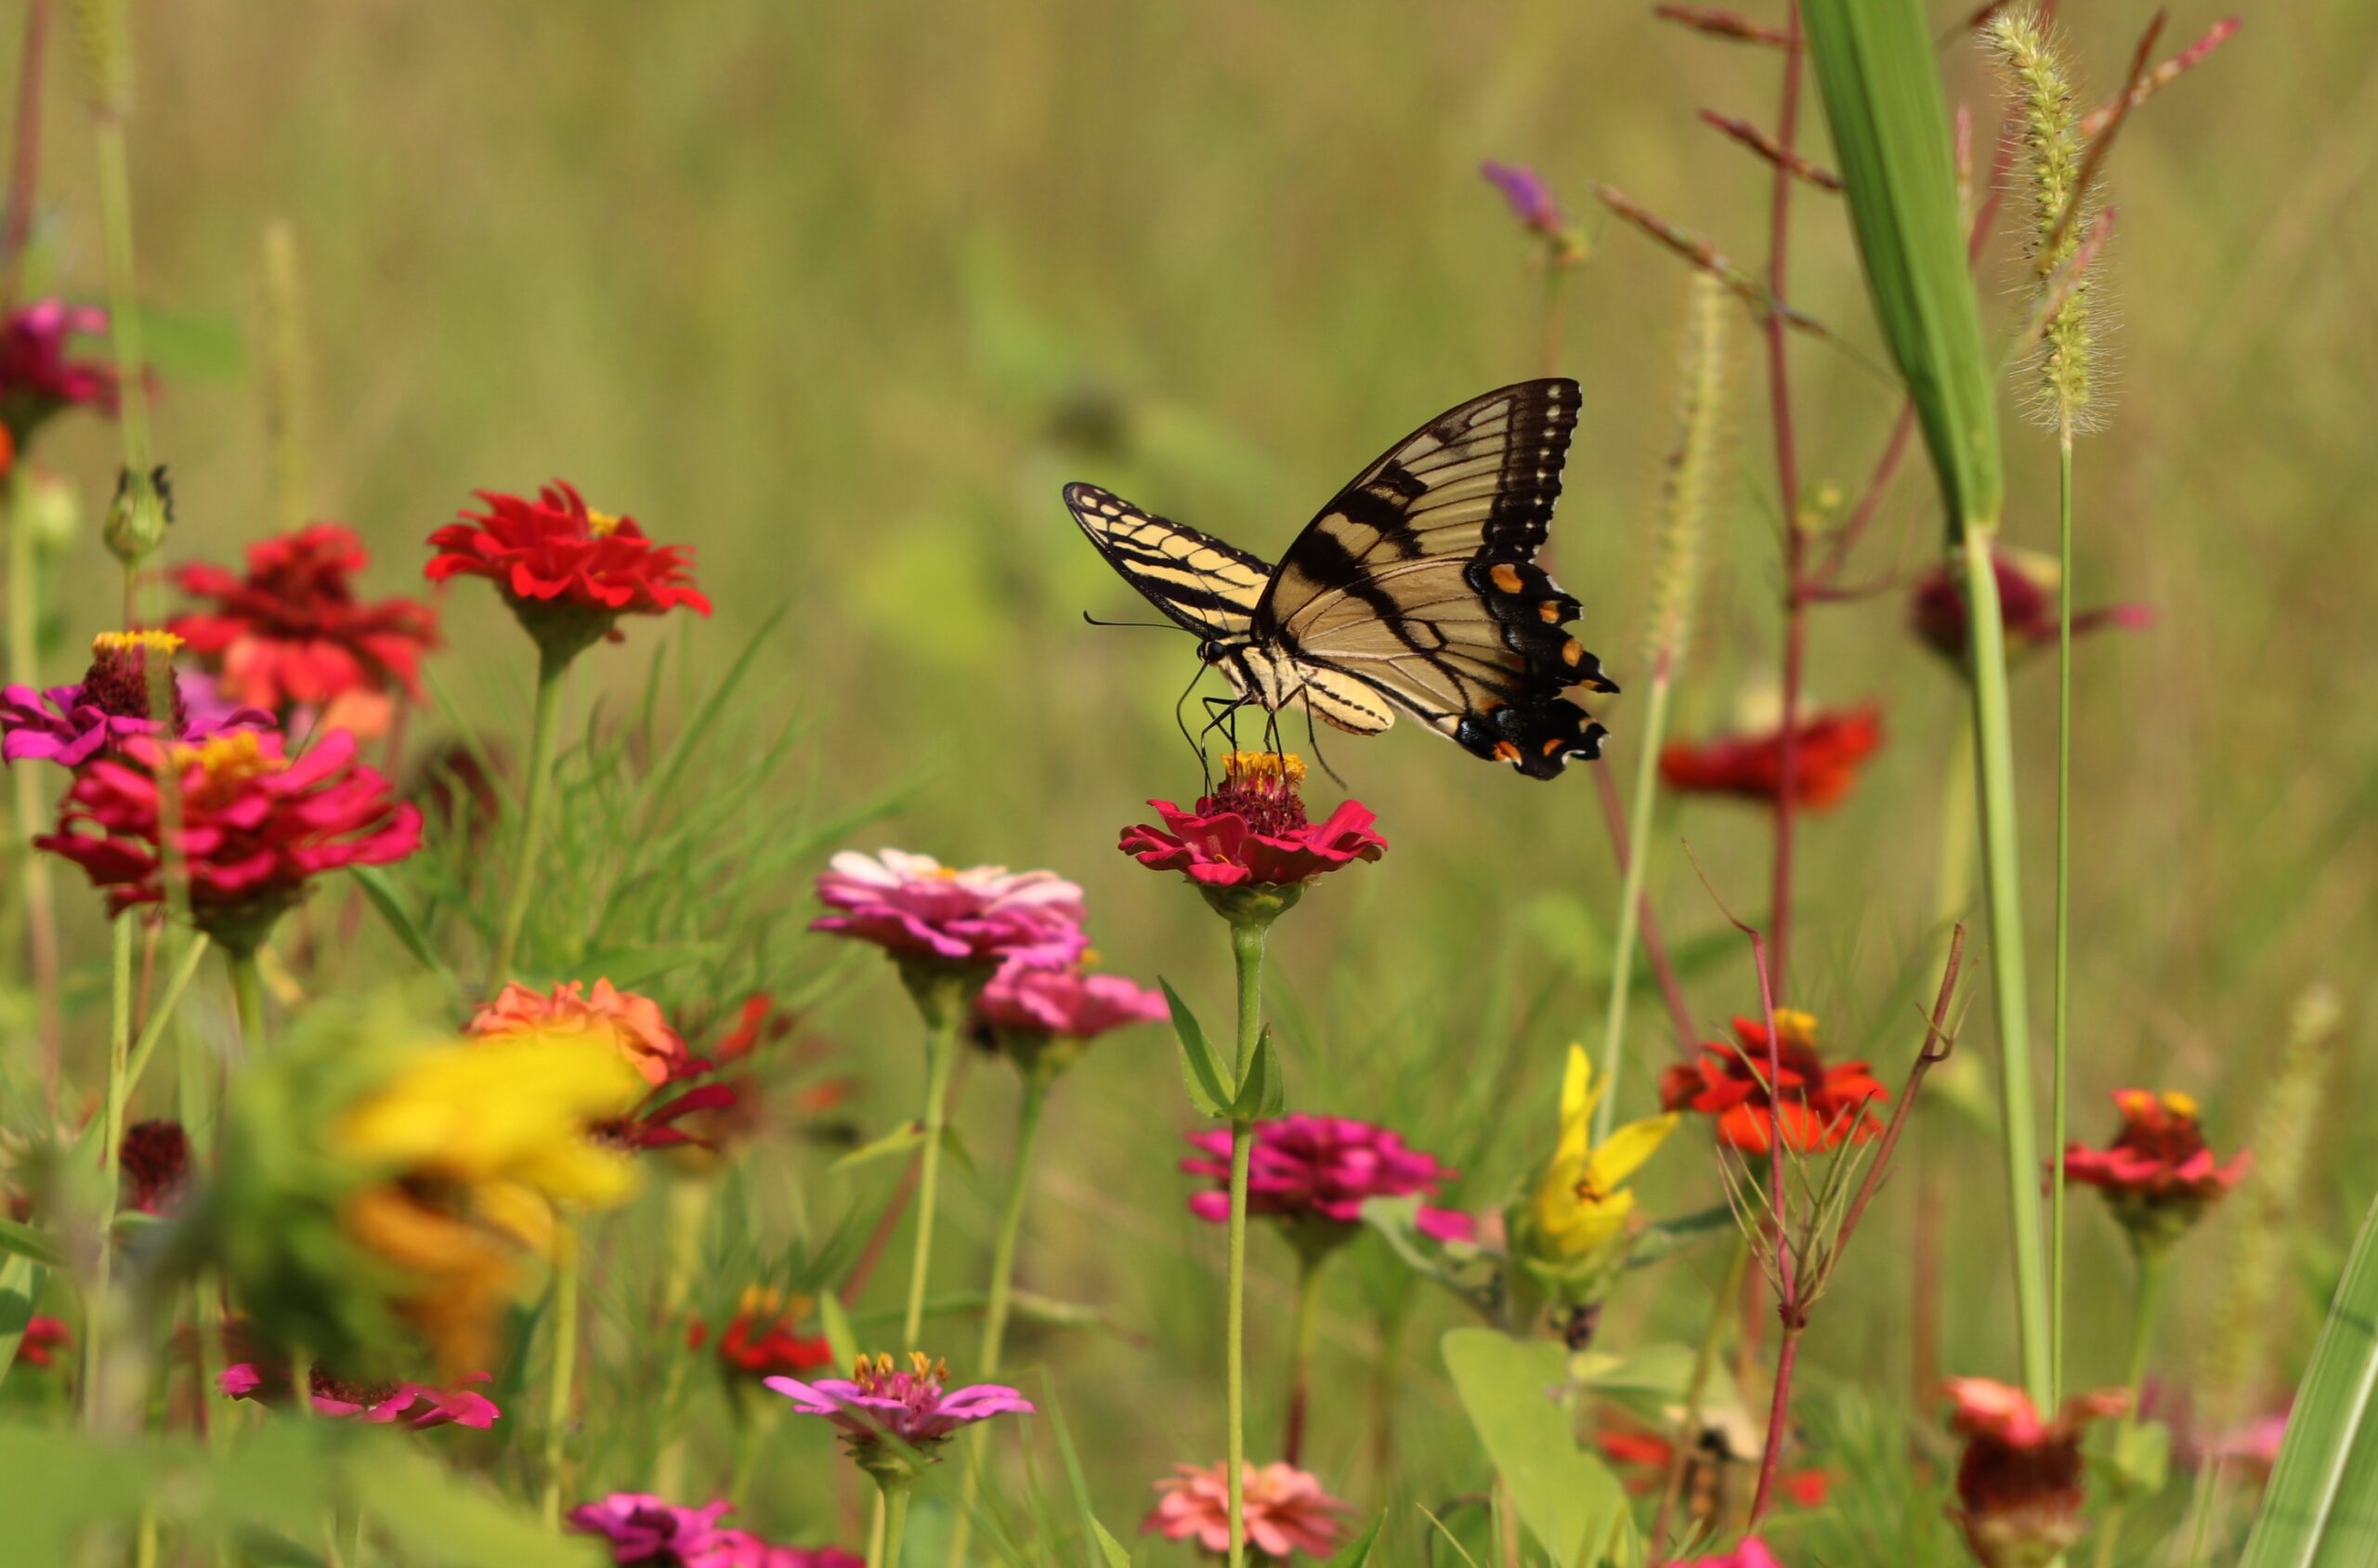 Eastern swallowtail butterfly visiting a cosmos flower.